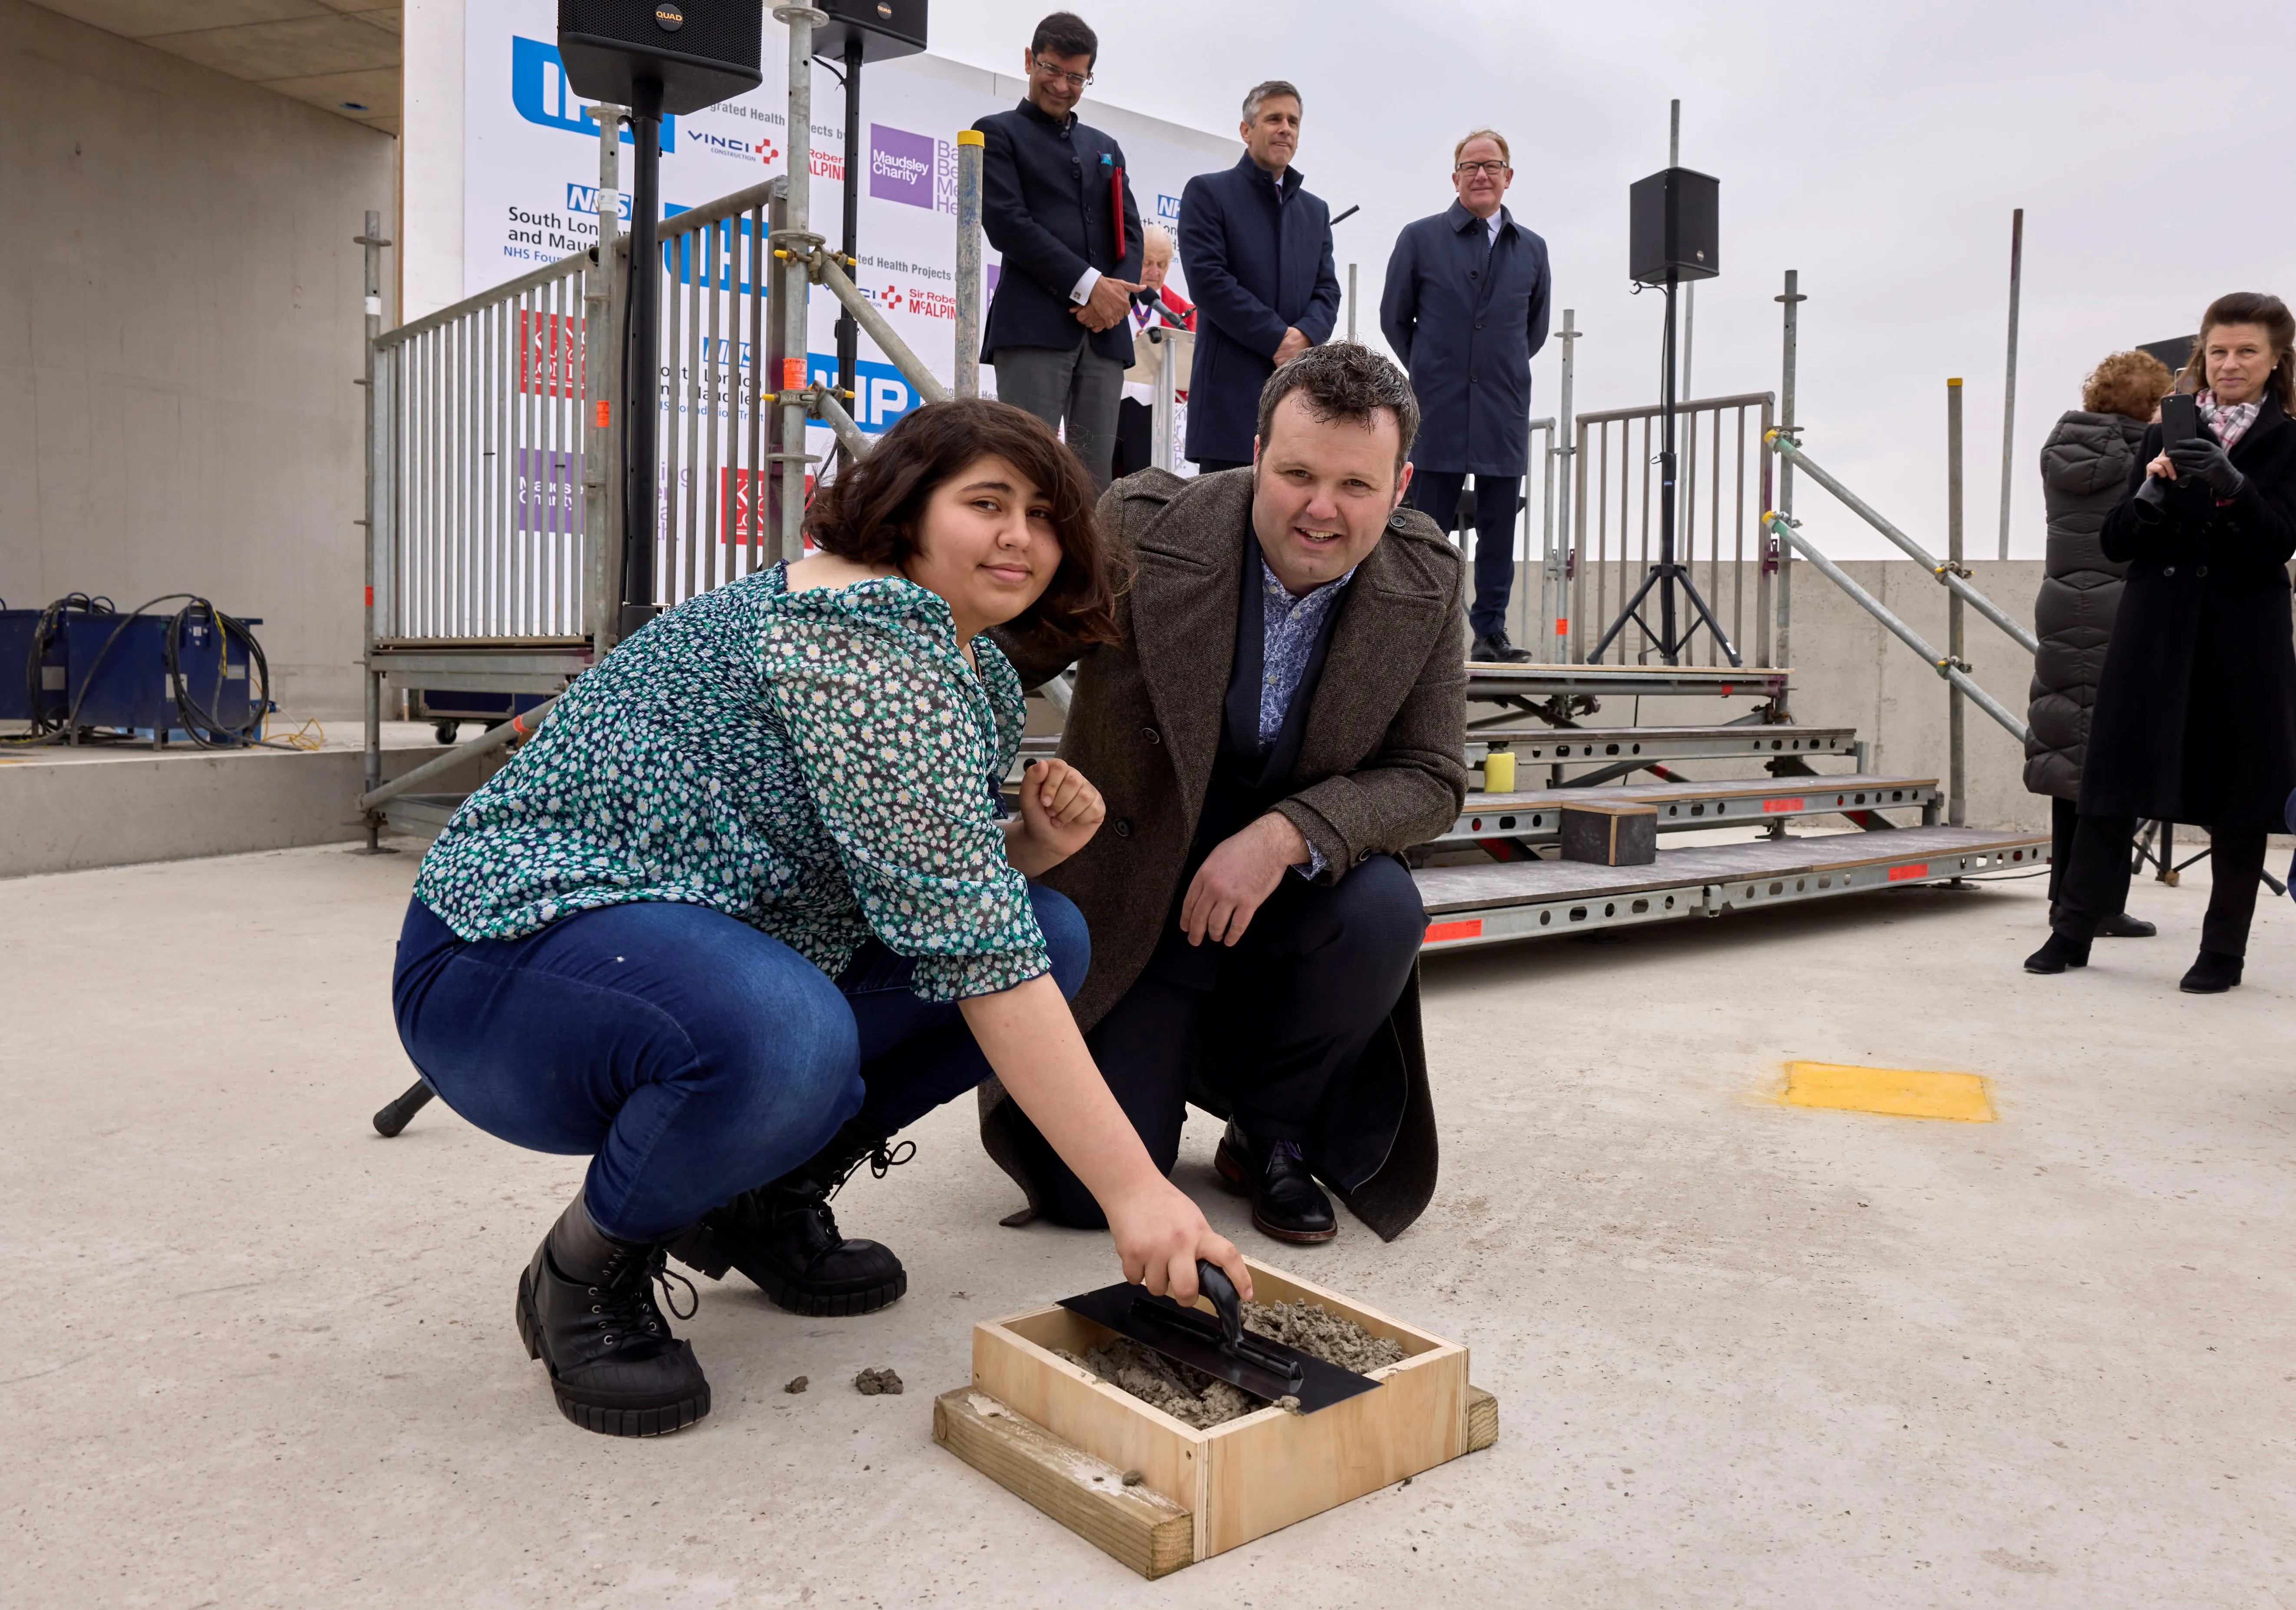 Young people who helped design the Centre attended the ceremony. Jasmin contributed to the ceremonial pouring of concrete with Works Manager, Ed Tidmarsh.